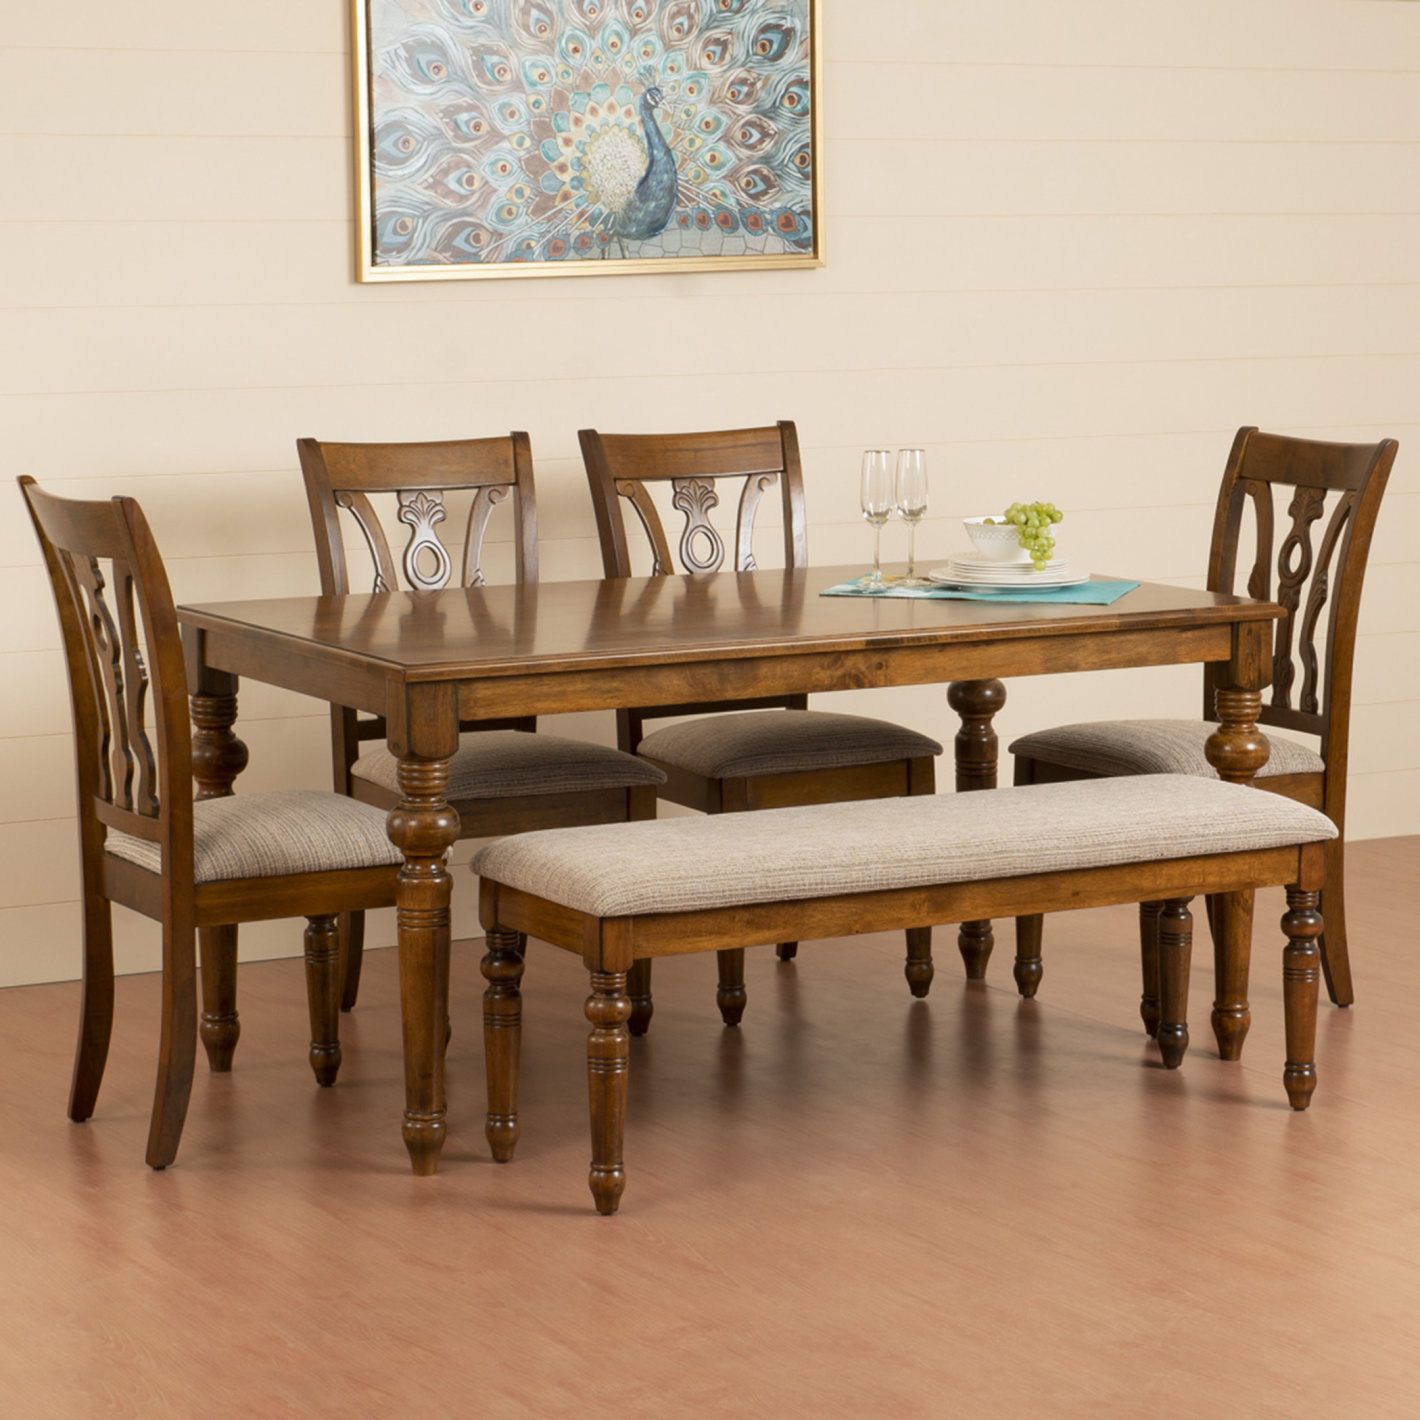 Tagetes 6 Seater Dining Table Set with Chairs and Bench | Brown | Solid ...